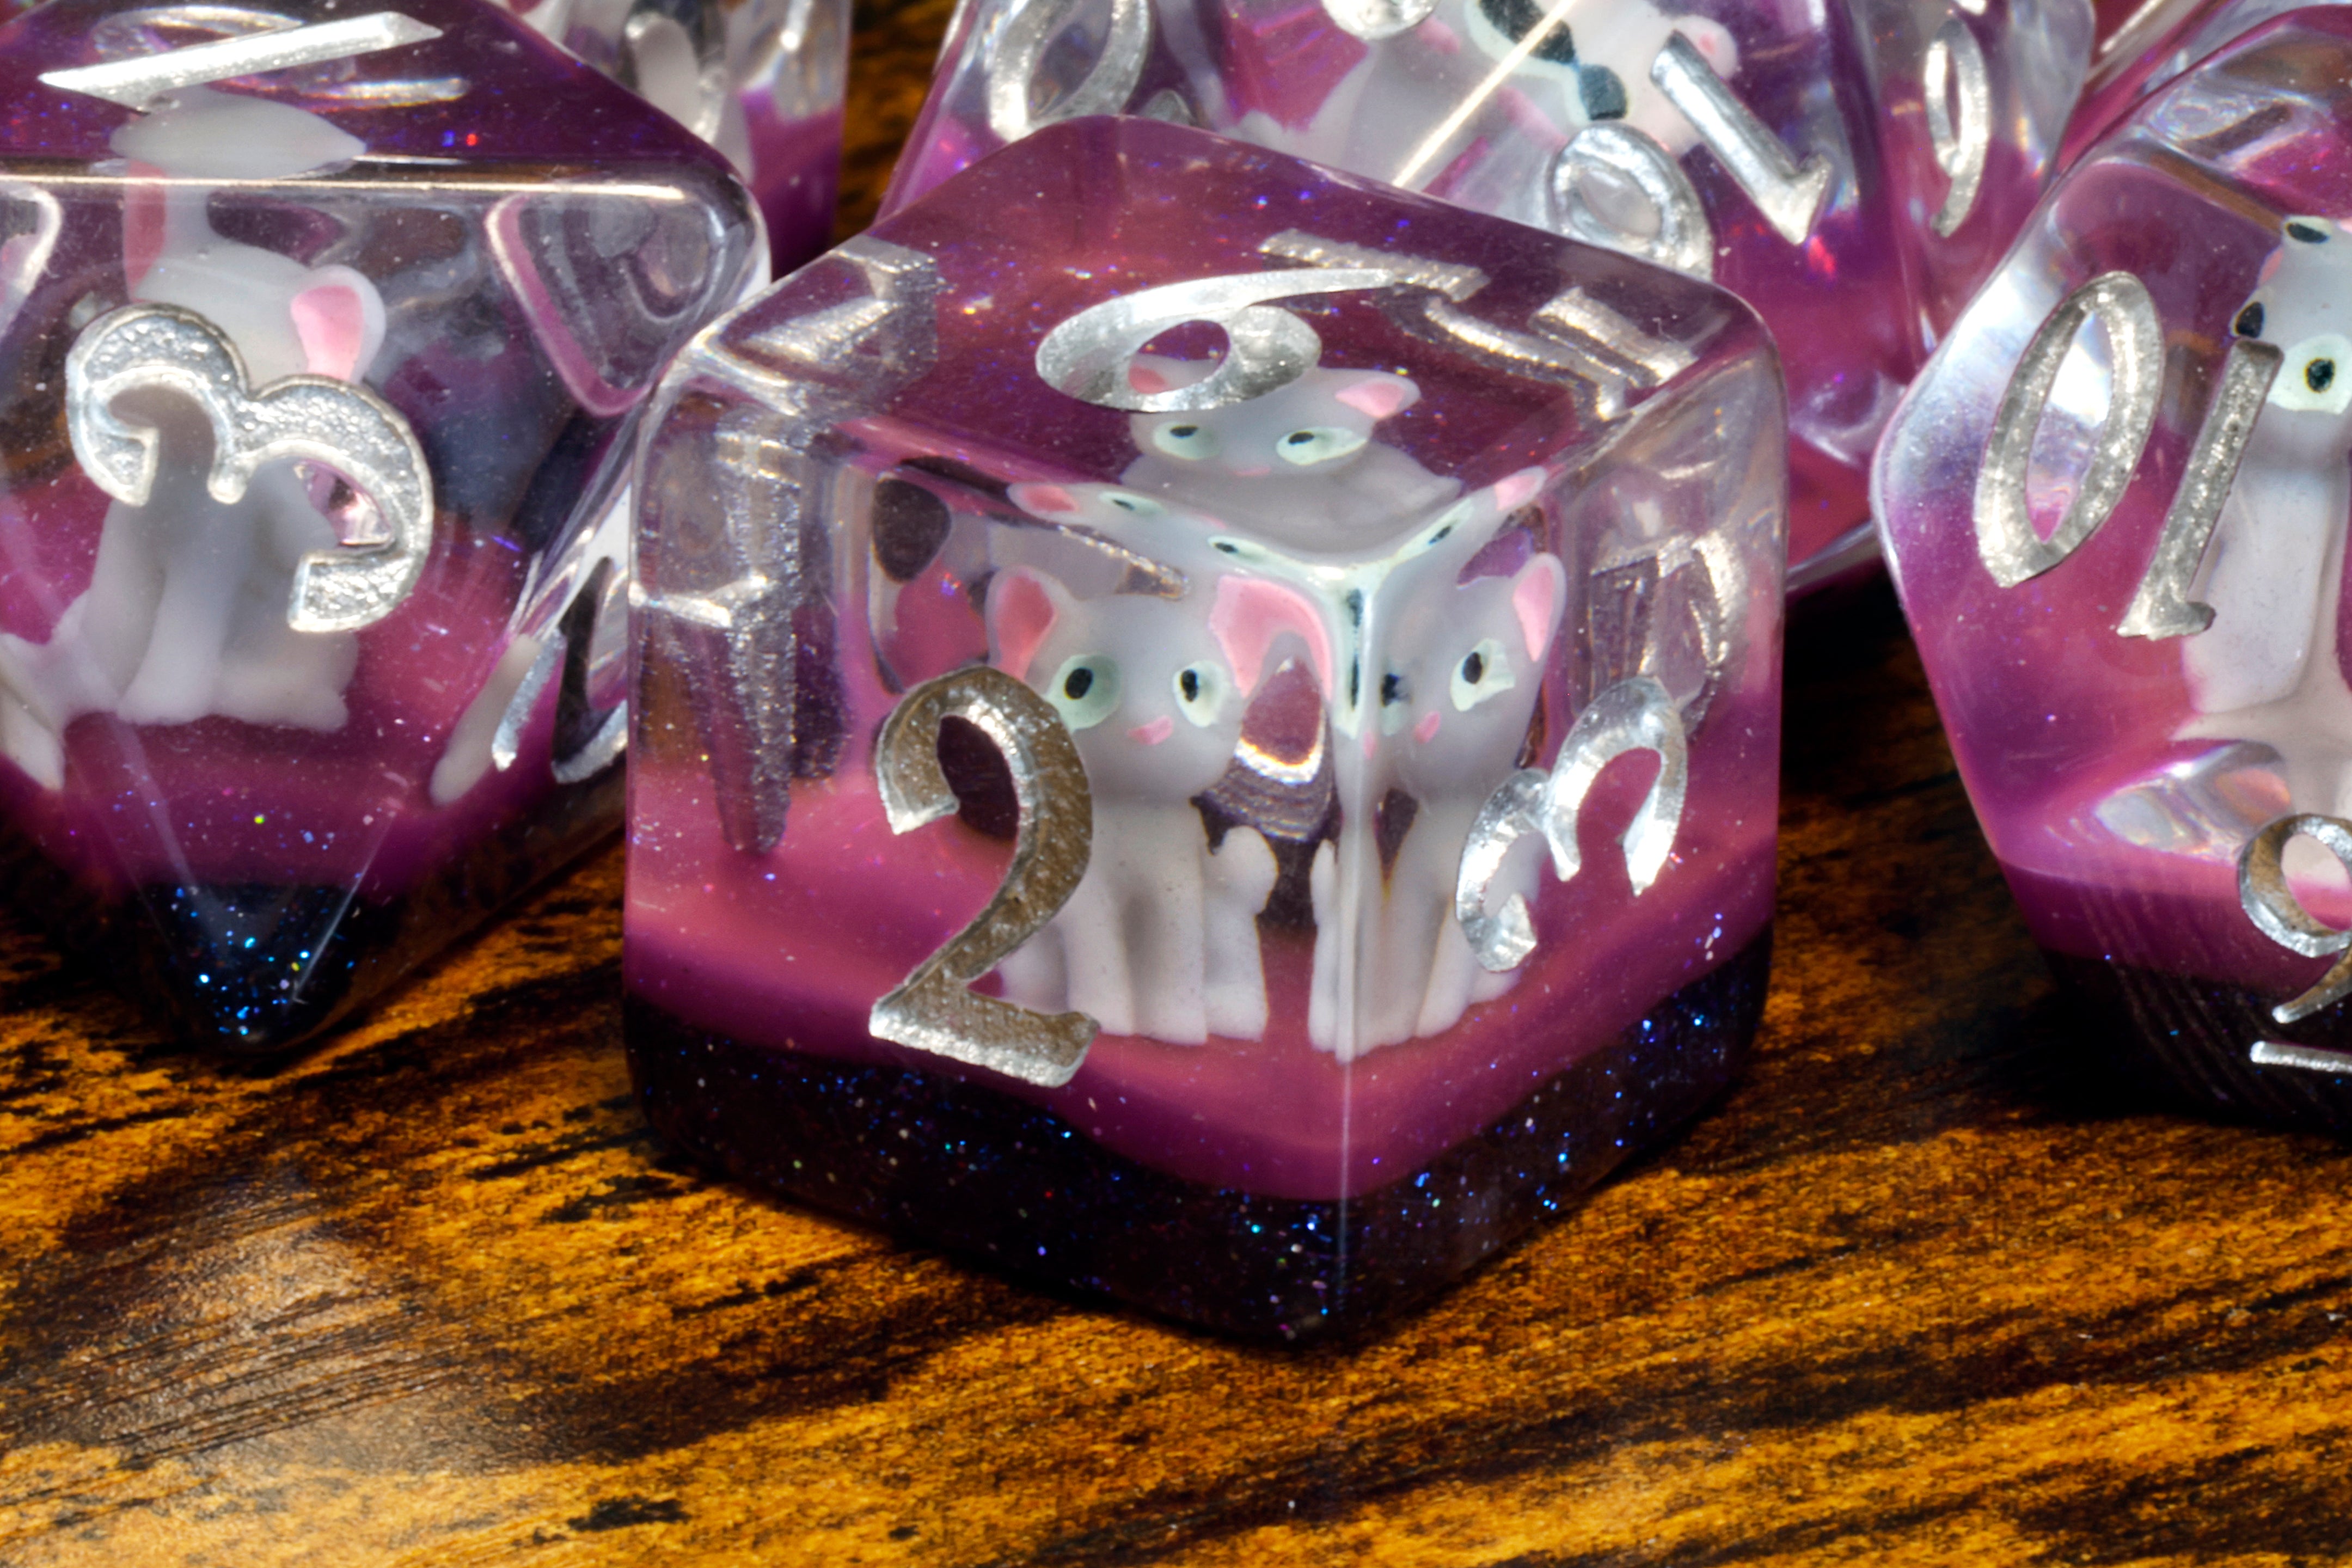 Lucky Whiskers dice set with light grey cats